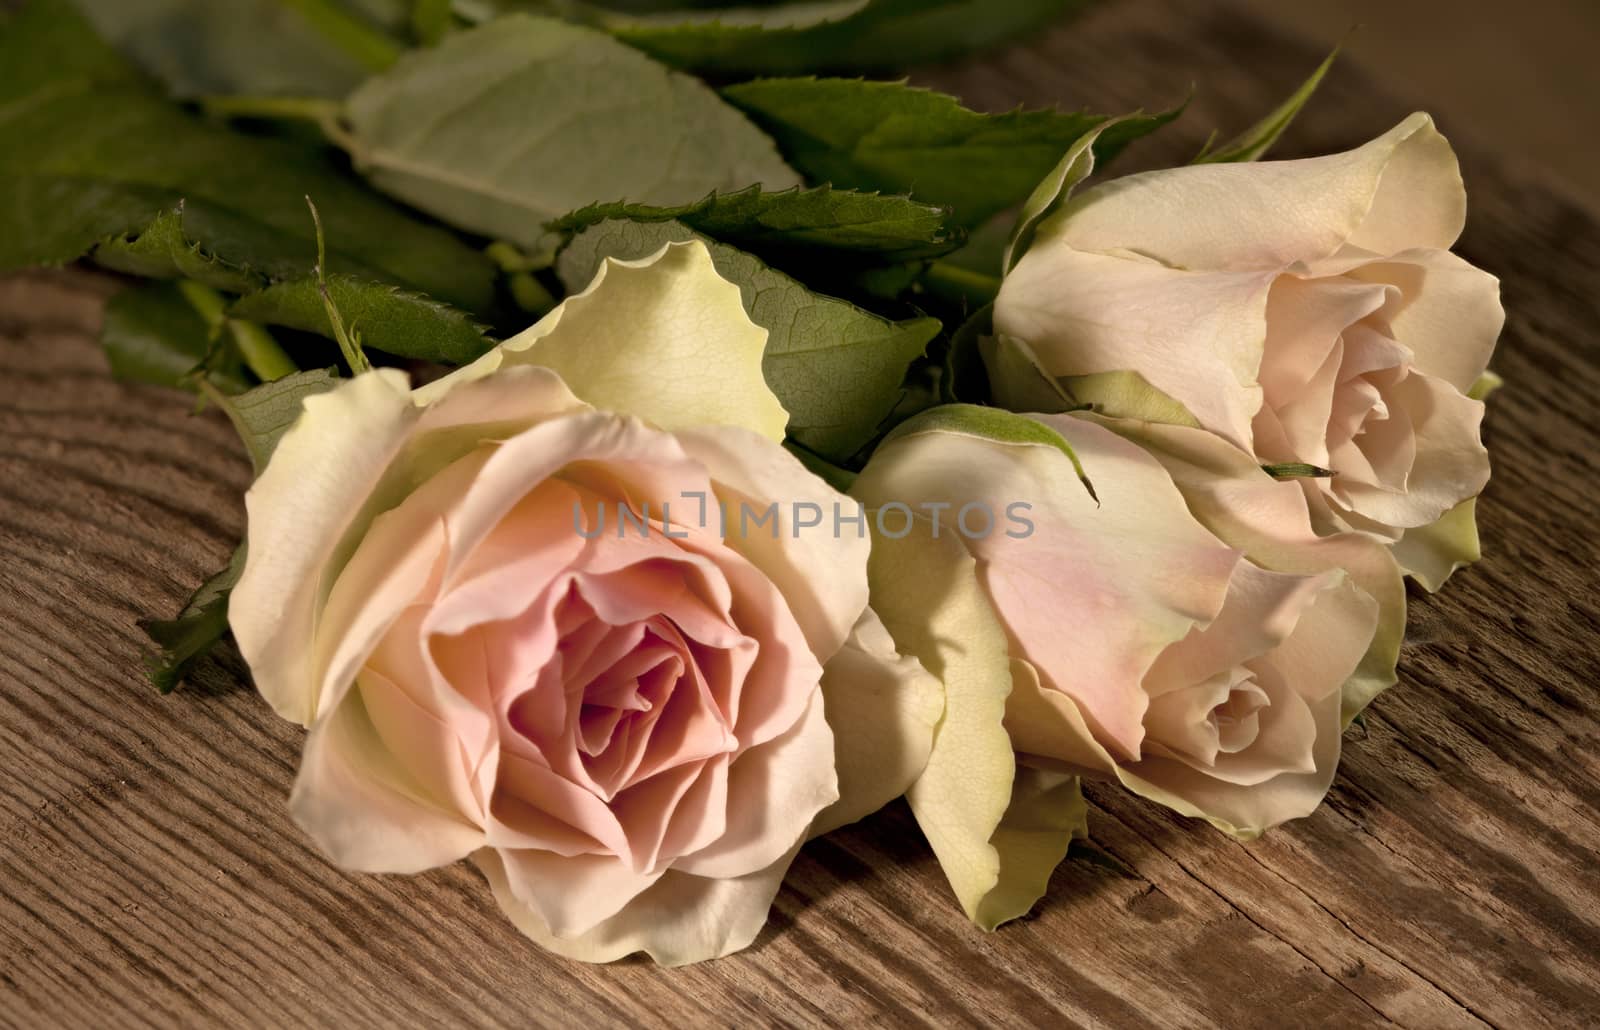 Bouquet three roses on Wooden Background